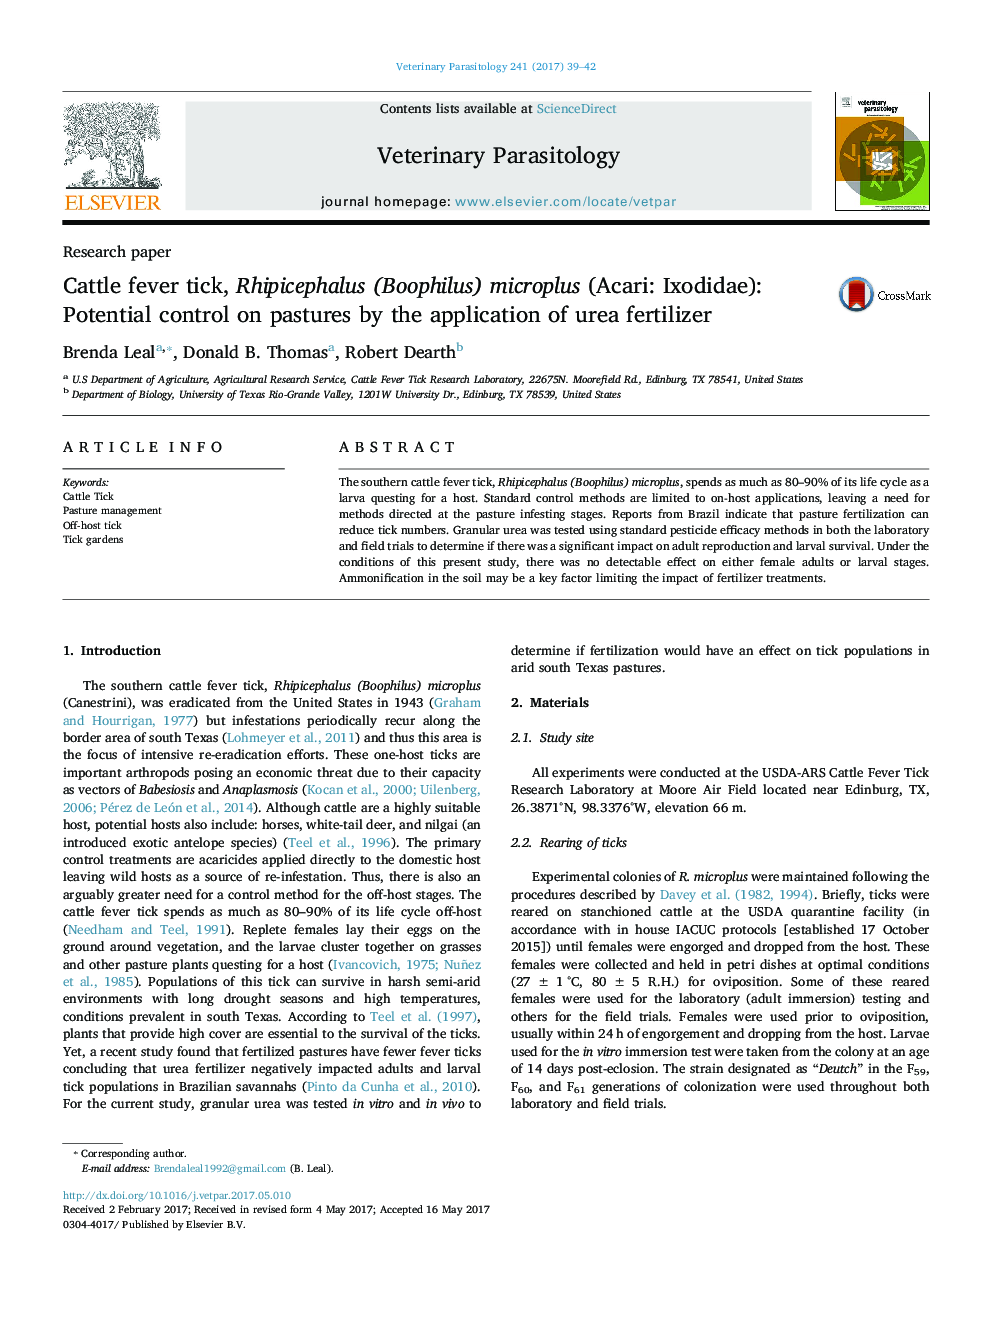 Cattle fever tick, Rhipicephalus (Boophilus) microplus (Acari: Ixodidae): Potential control on pastures by the application of urea fertilizer